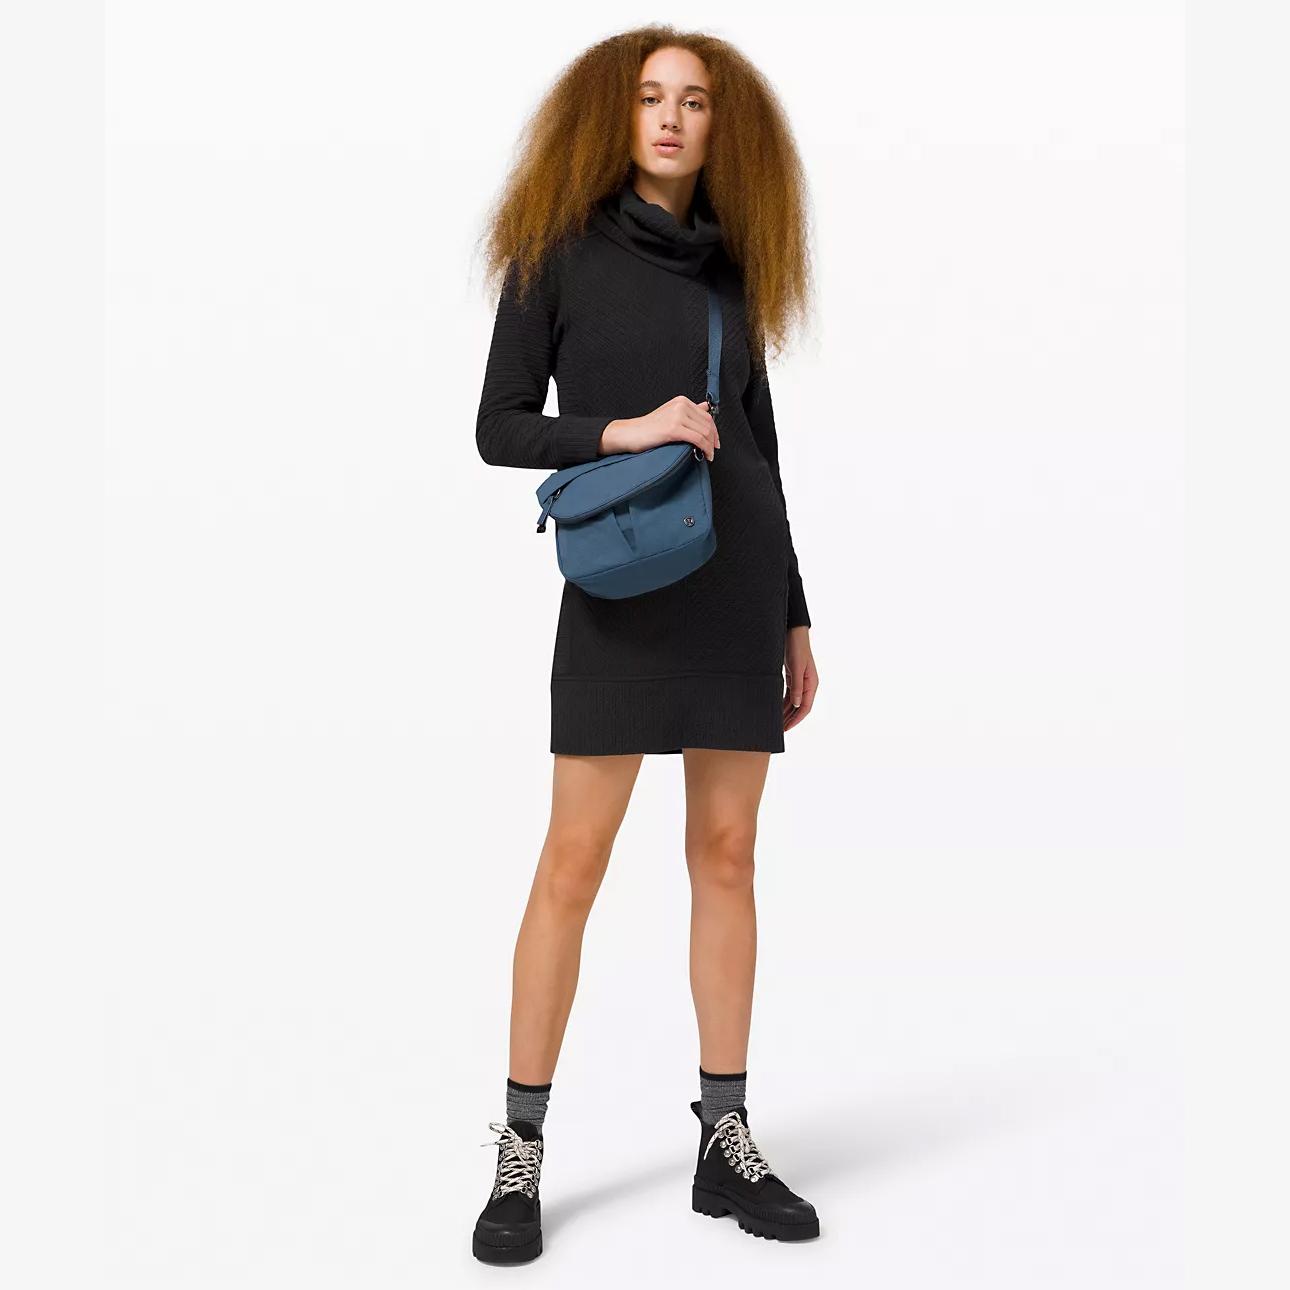 Lululemon Womens On Repeat Dress for $49 Shipped